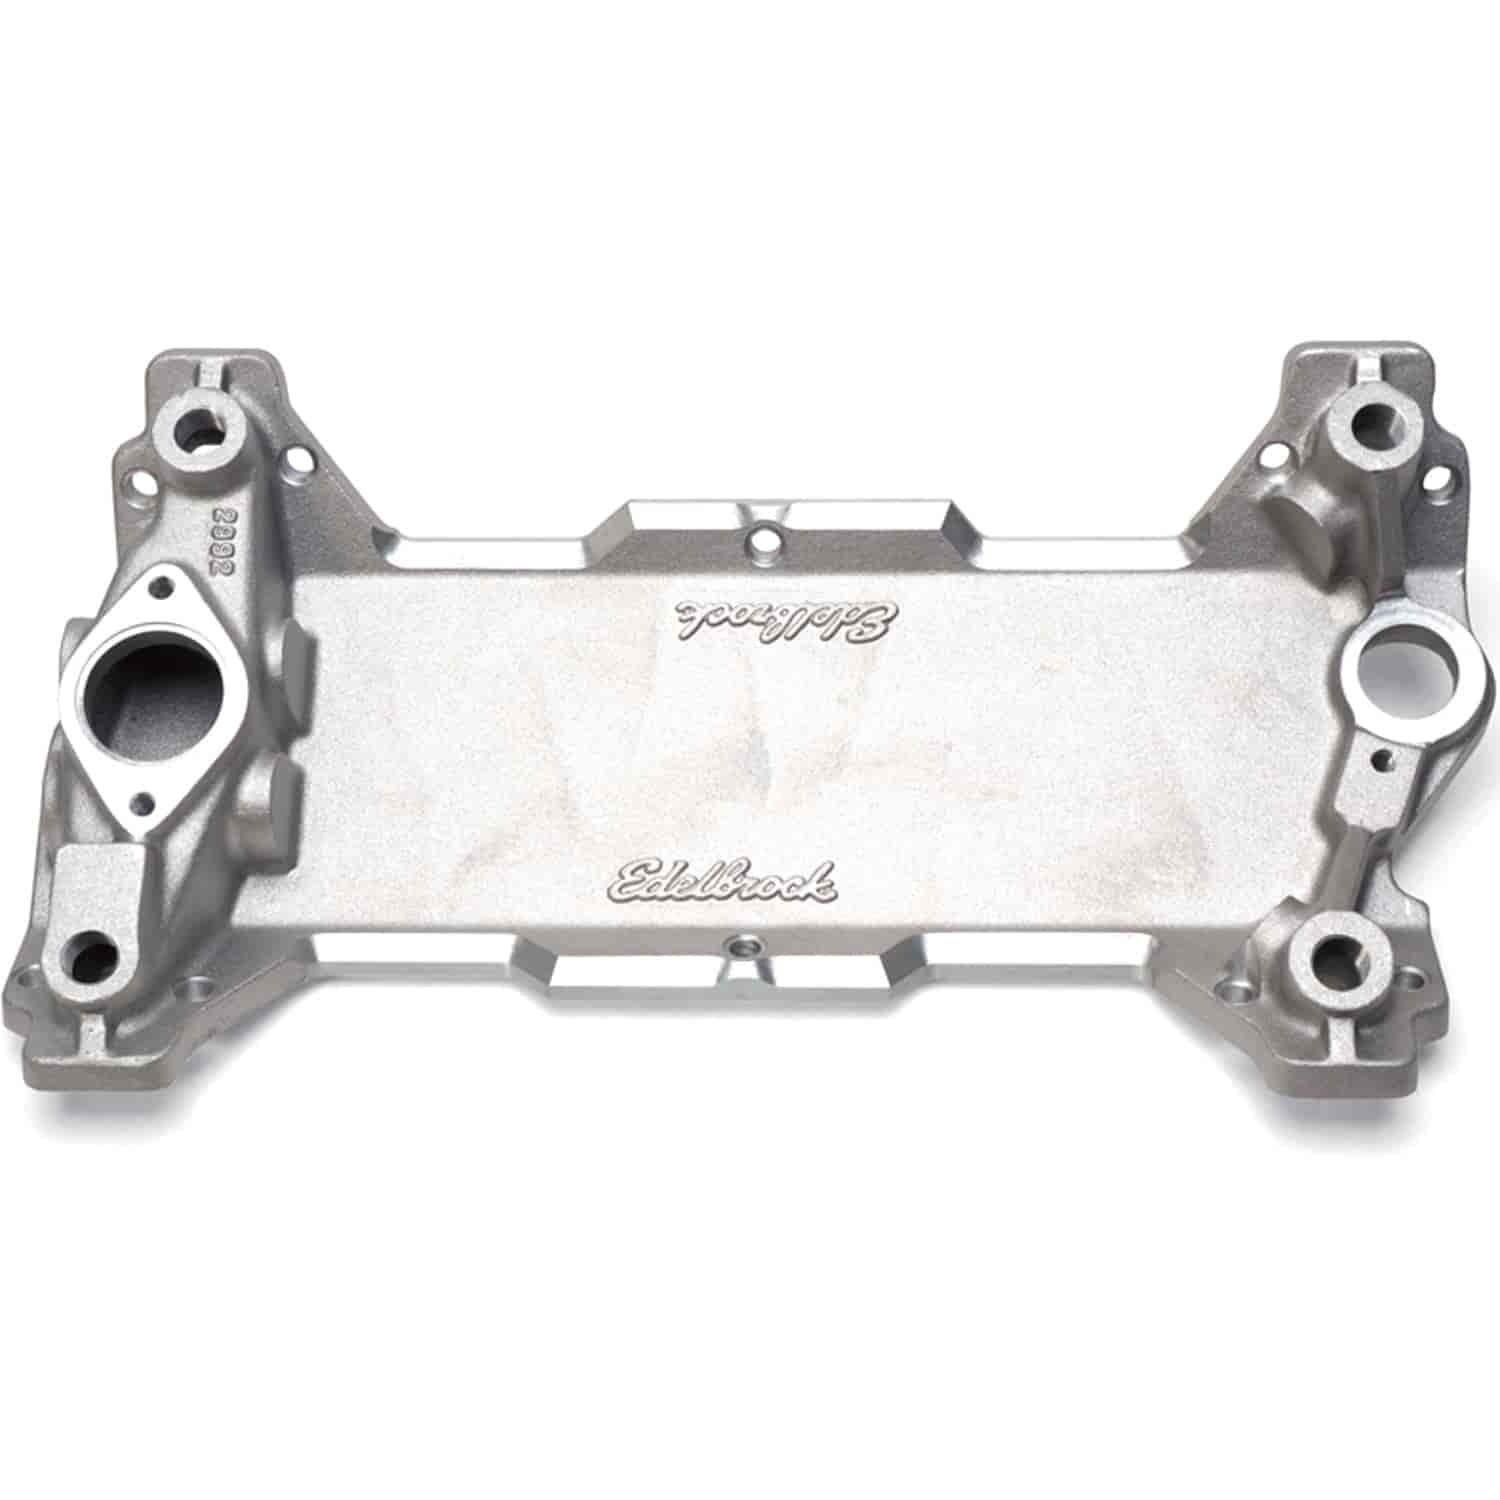 Victor Glidden 15°-18° Intake Manifold Base Only for Small Block Chevy